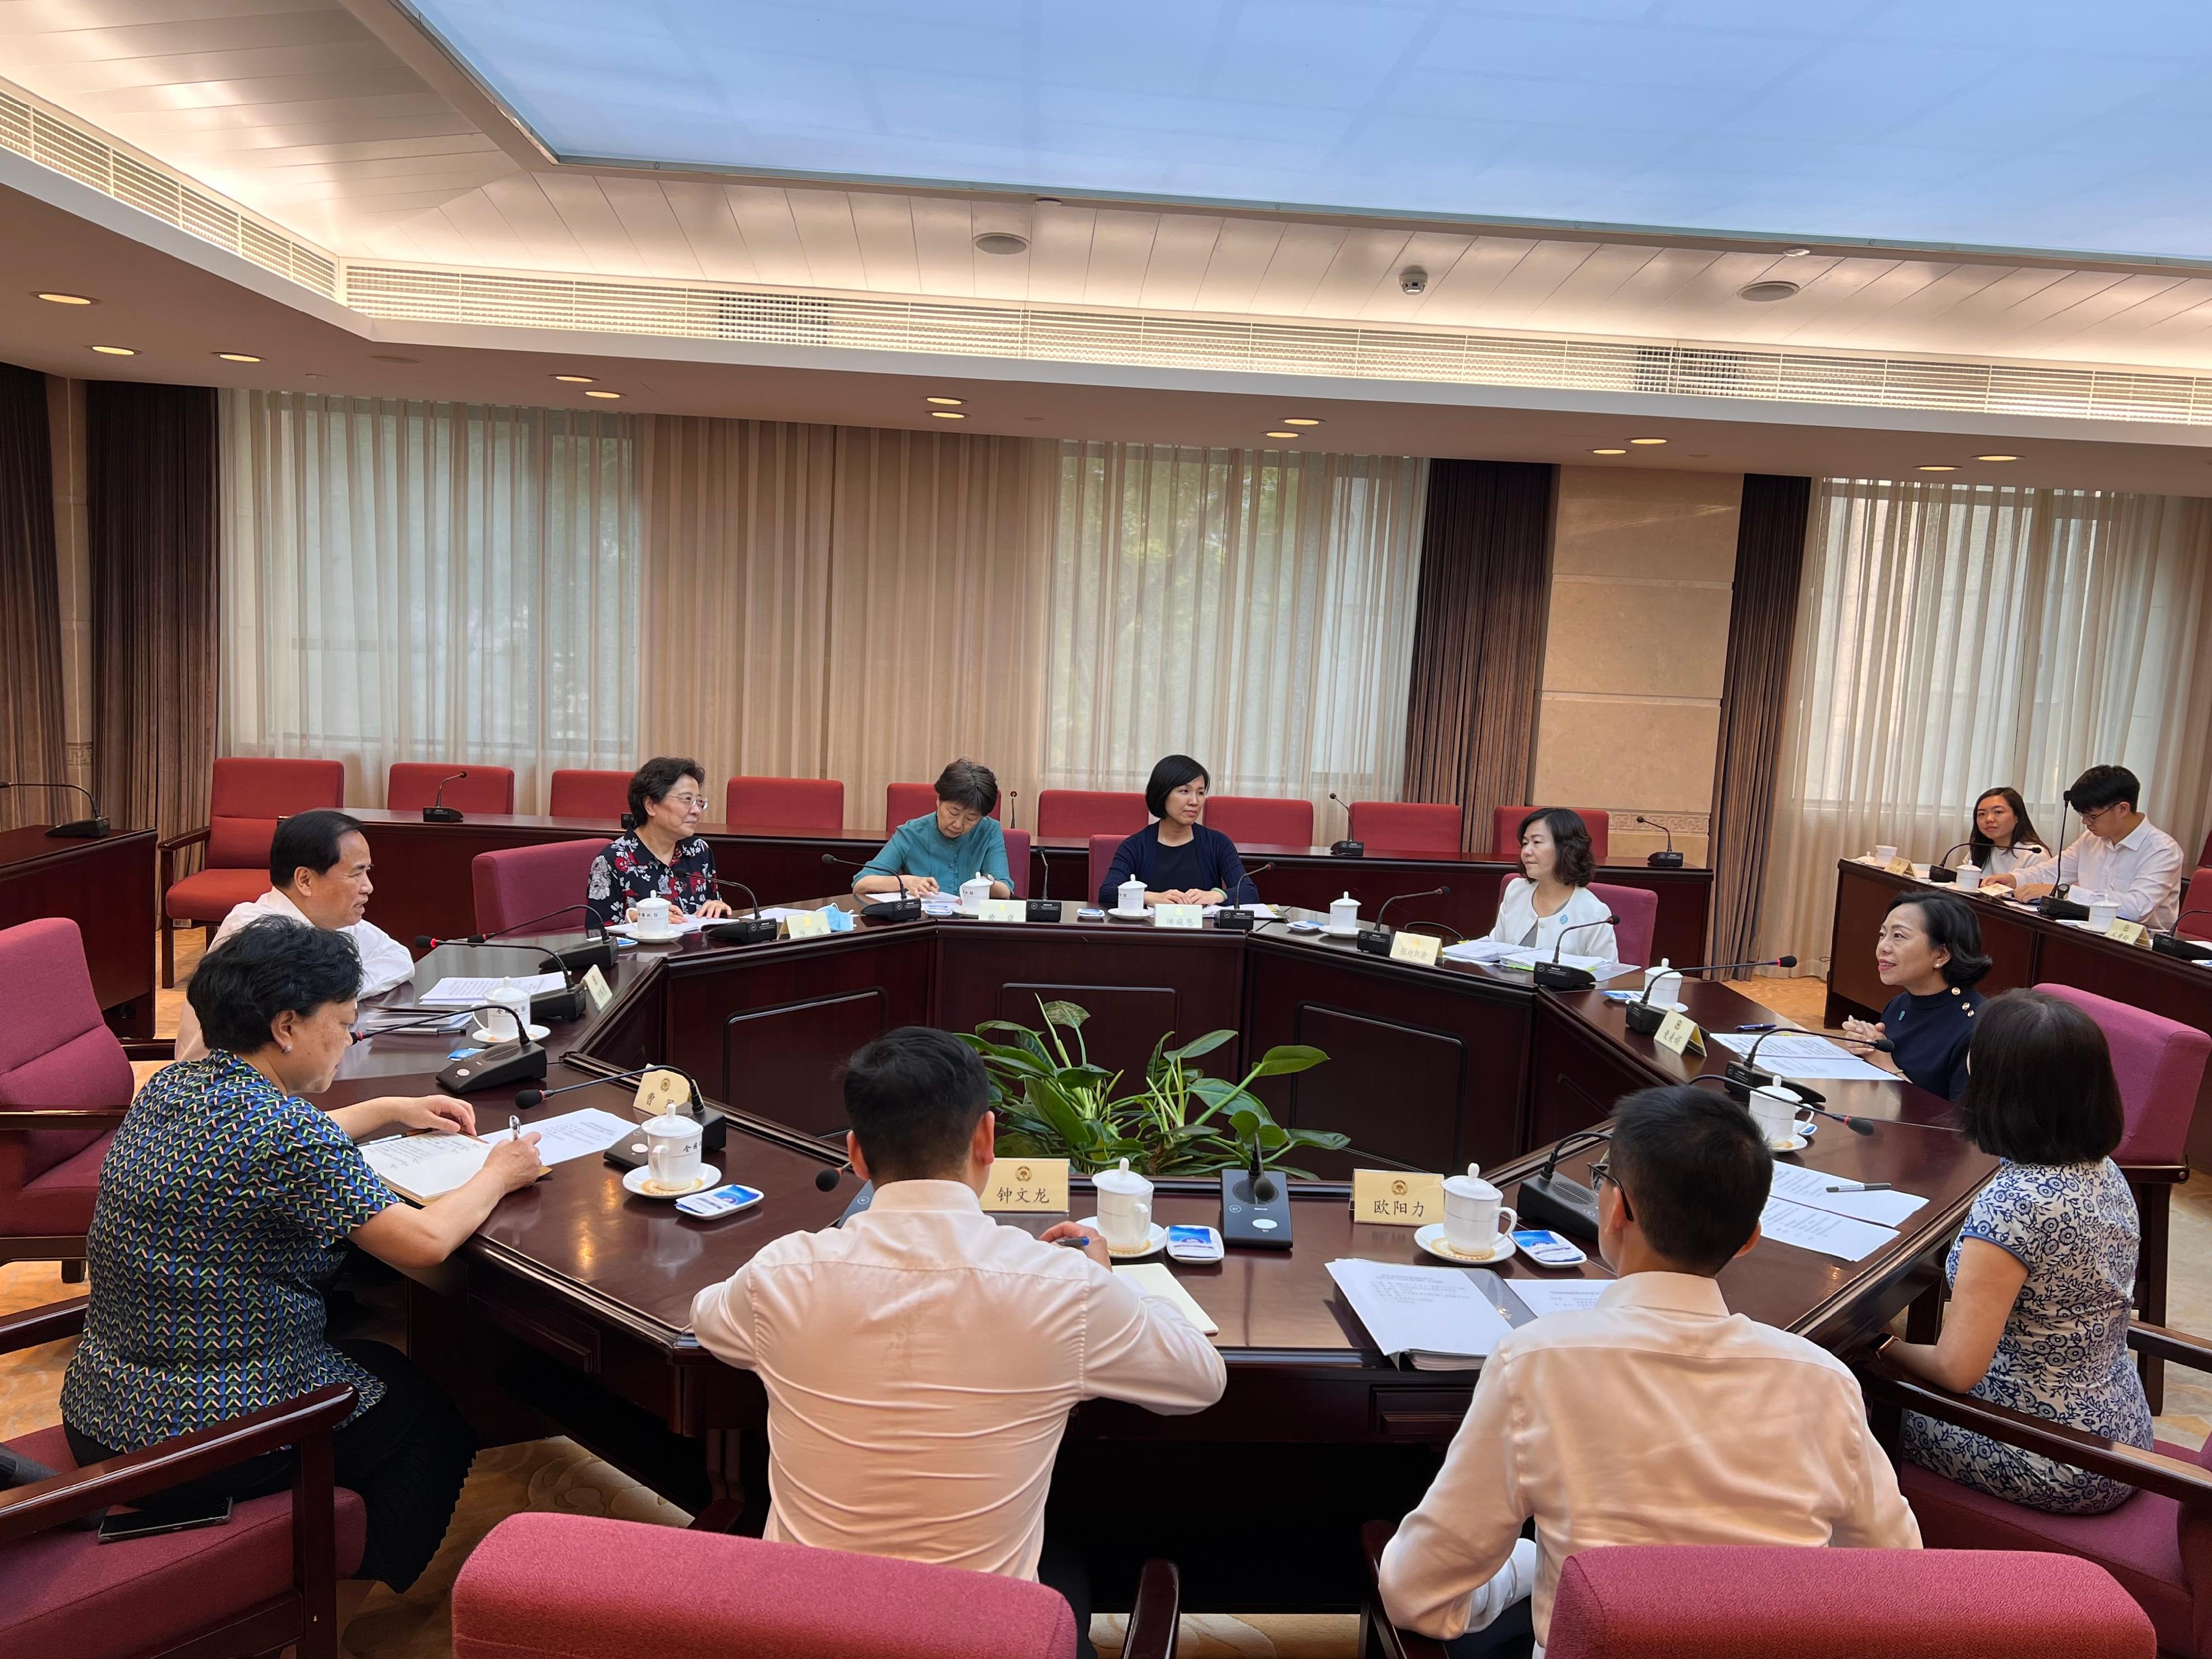 The Secretary for Home and Youth Affairs, Miss Alice Mak, continued her visit in Beijing today (July 18) and visited the Committee on Liaison with Hong Kong, Macao, Taiwan and Overseas Chinese of the National Committee of the Chinese People's Political Consultative Conference (CPPCC). Photo shows Miss Mak (first right) meeting with the Chairperson of the Committee on Liaison with Hong Kong, Macao, Taiwan and Overseas Chinese of the National Committee of the CPPCC, Mr Liu Cigui (first left), to exchange views on ways to promote Hong Kong young people to integrate into the overall development of the country.